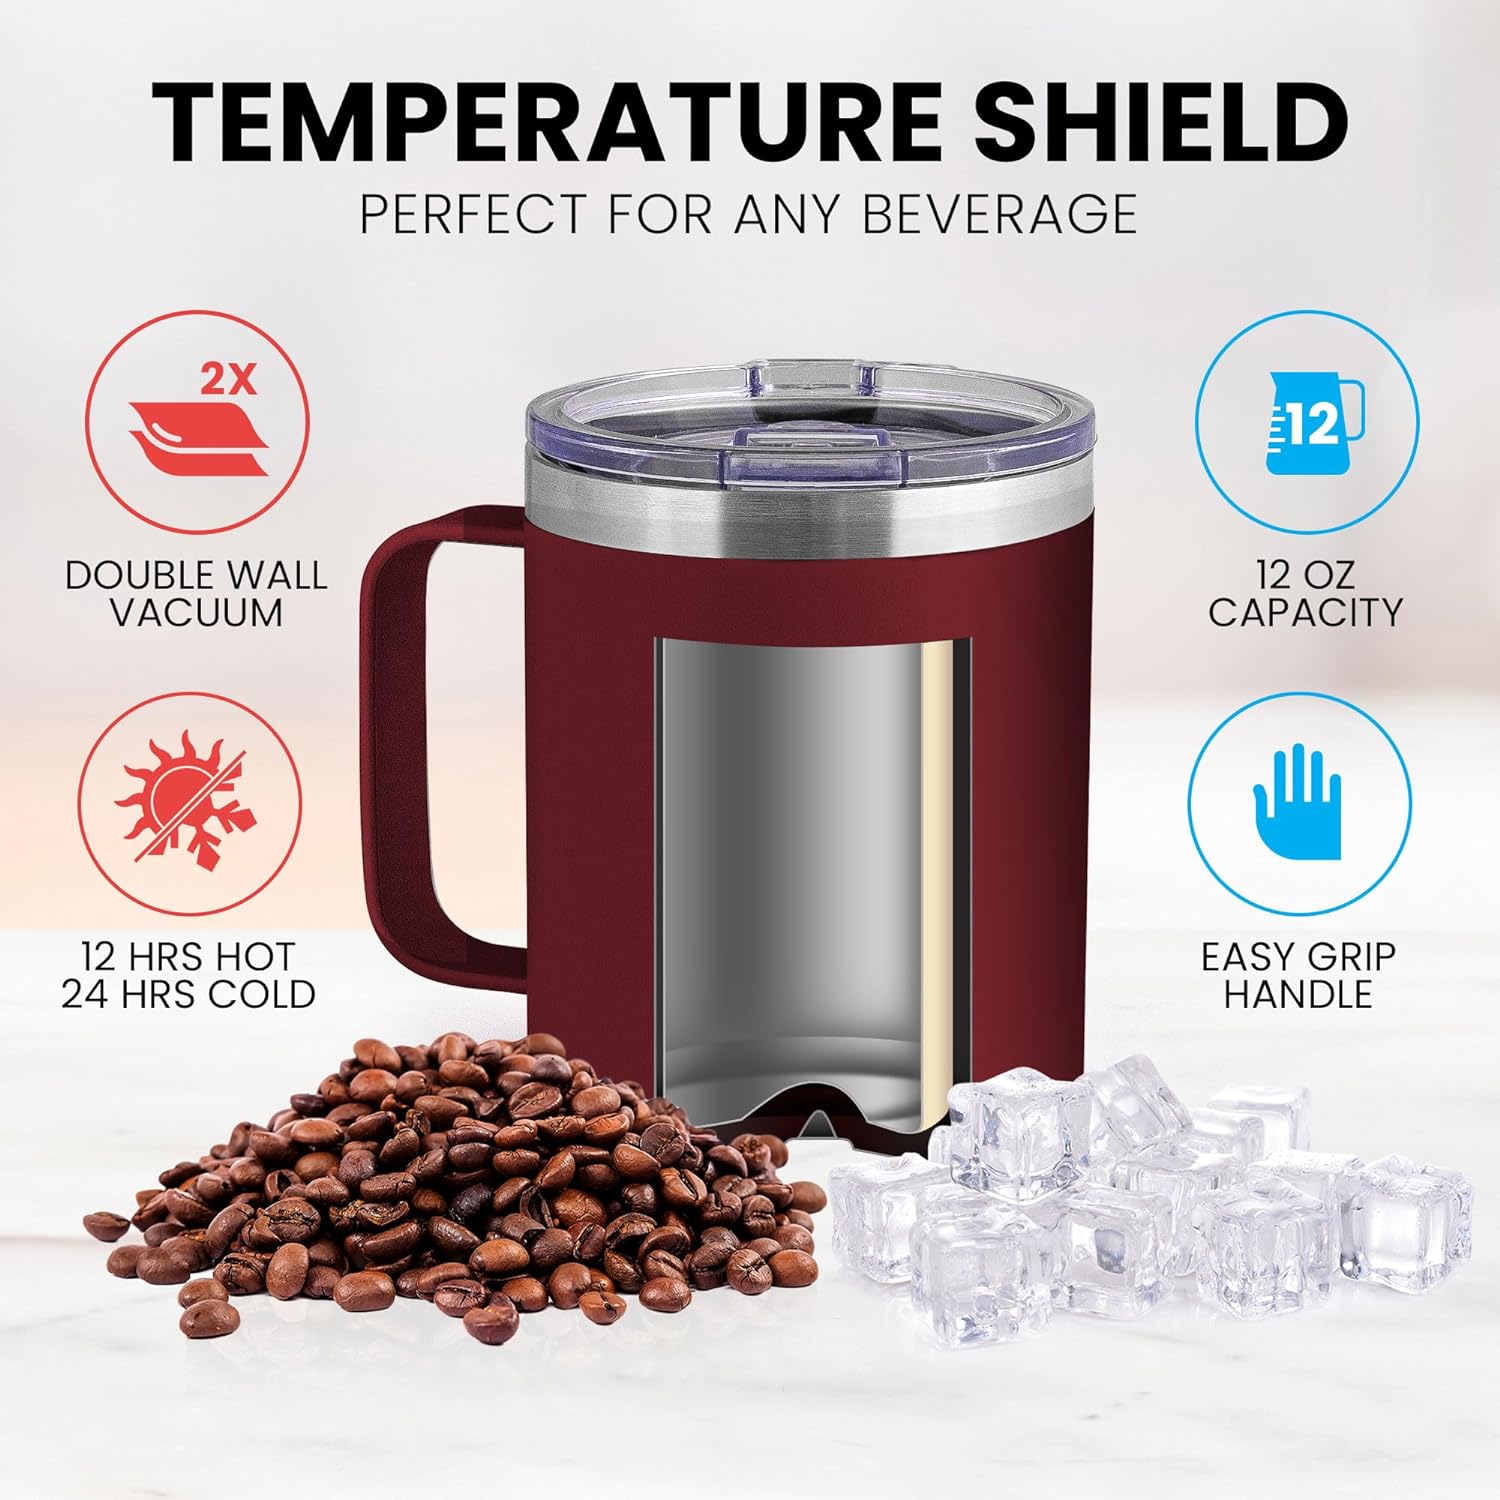 Zulay 14 oz Insulated Coffee Mug with Lid - Stainless Steel Camping Mug Tumbler with Handle - Double Wall Vacuum Duracoated Insulated Mug For Travel, Camping, Office, Outdoor Plum 14 oz with handle